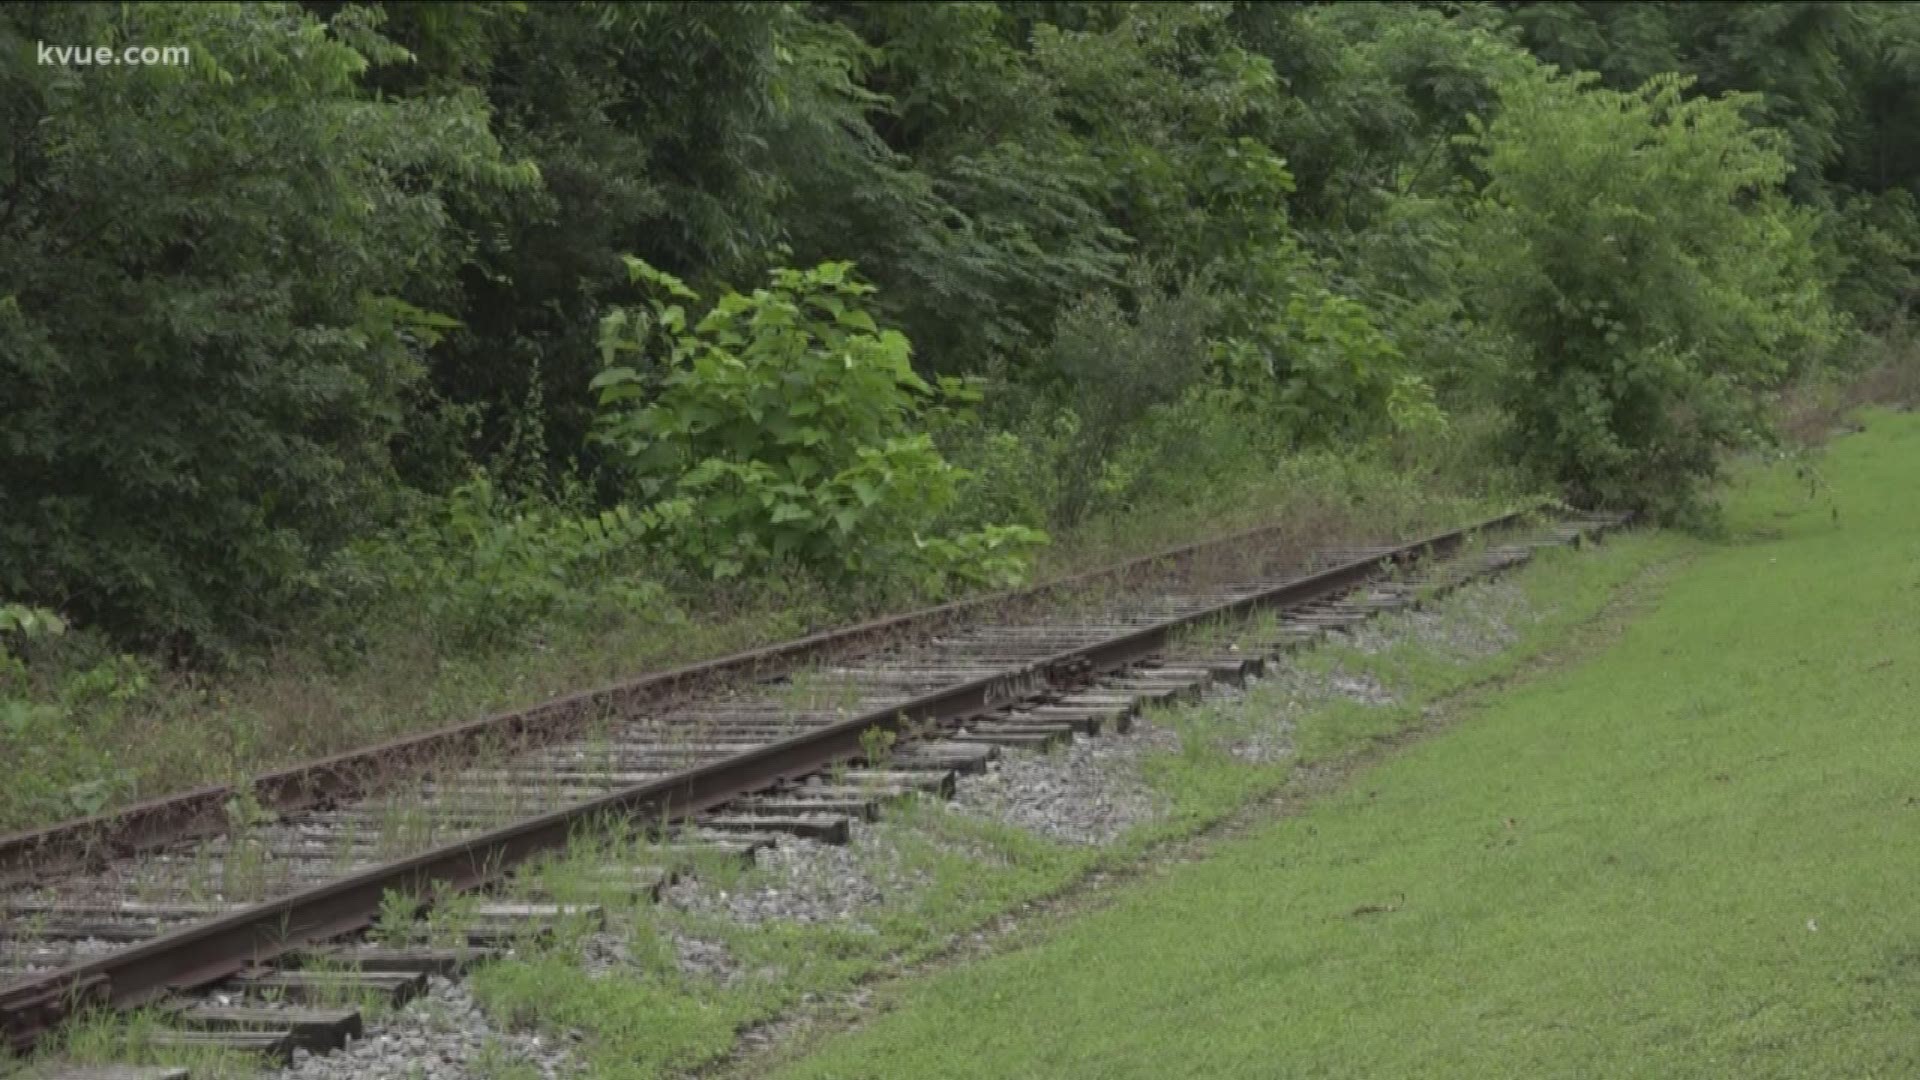 Transportation leaders have approved thousands of dollars for a study to potentially use a rail line in South Austin.